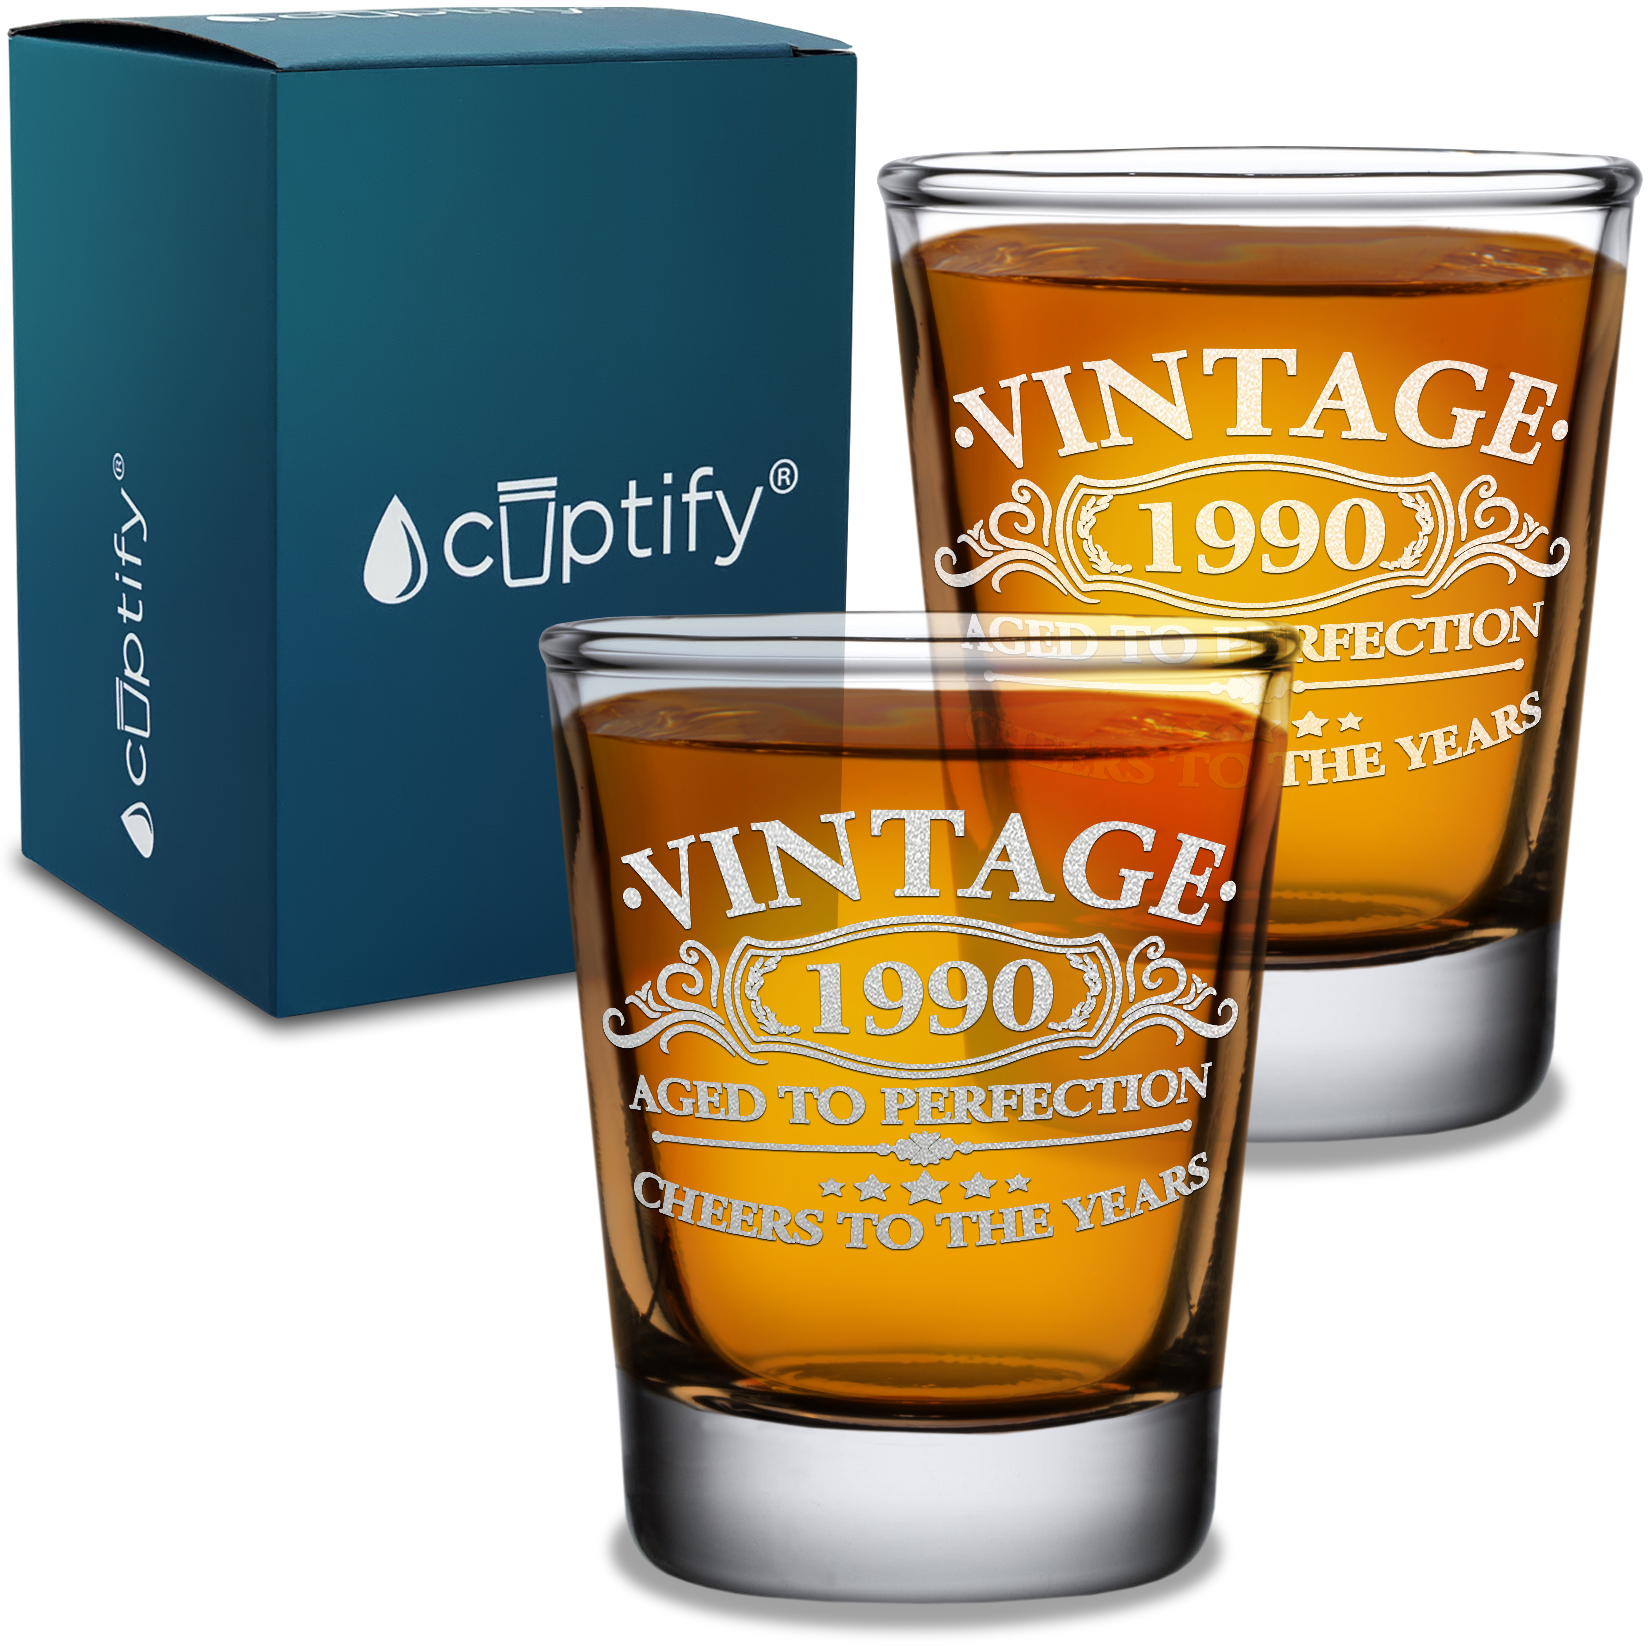 Vintage Aged To Perfection Cheers To 31 Years 1990 Laser Engraved on 2oz Shot Glasses - Set of 2